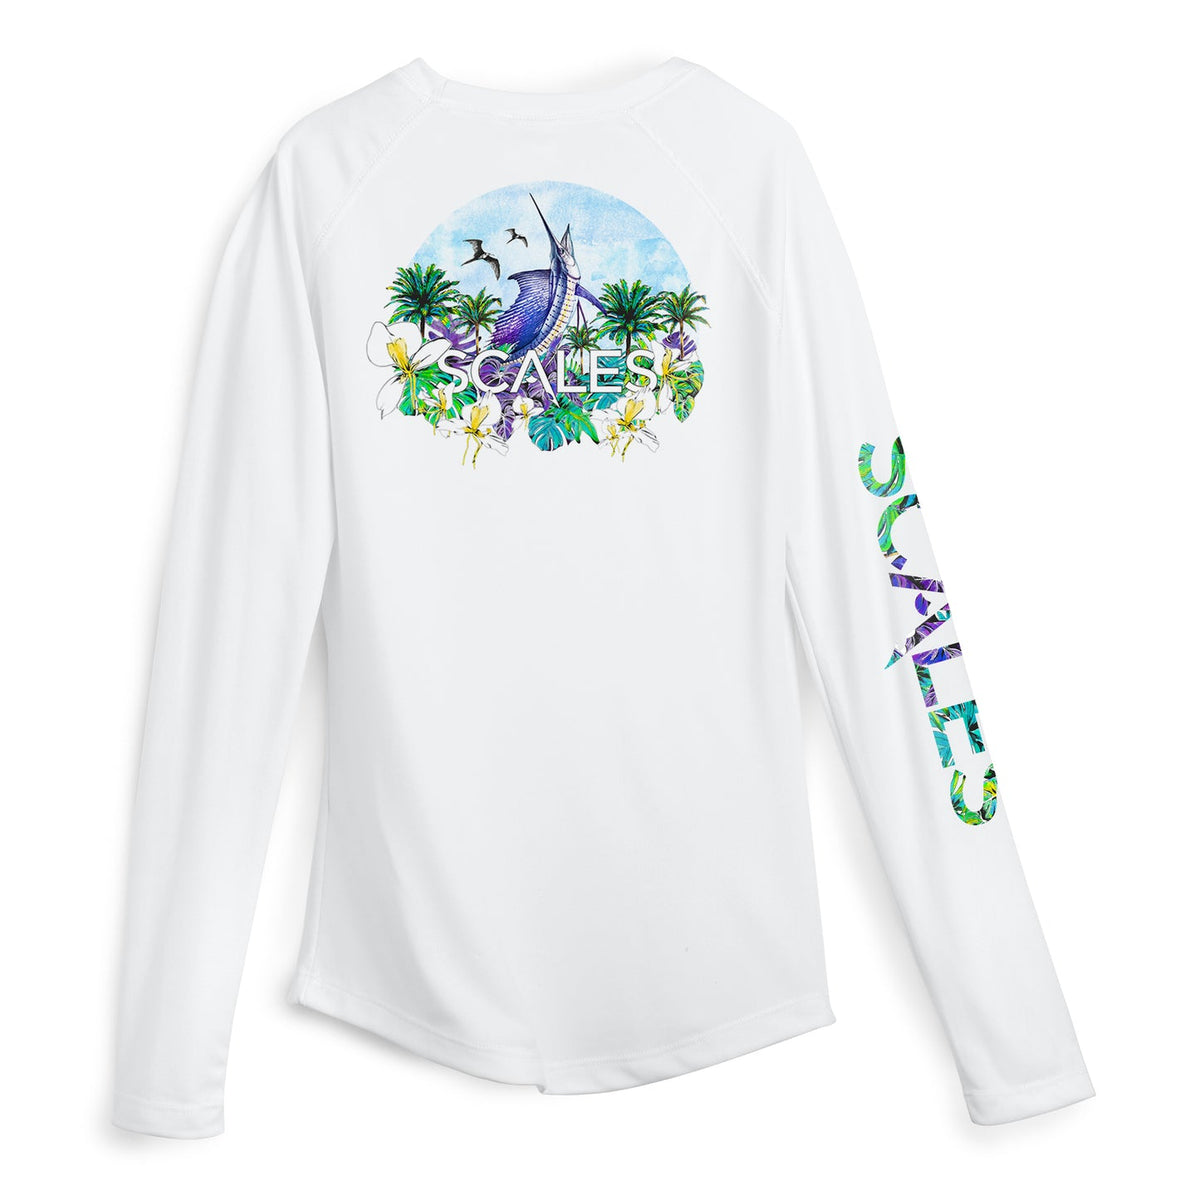 SCALES Sail Away Womens Long Sleeve Performance